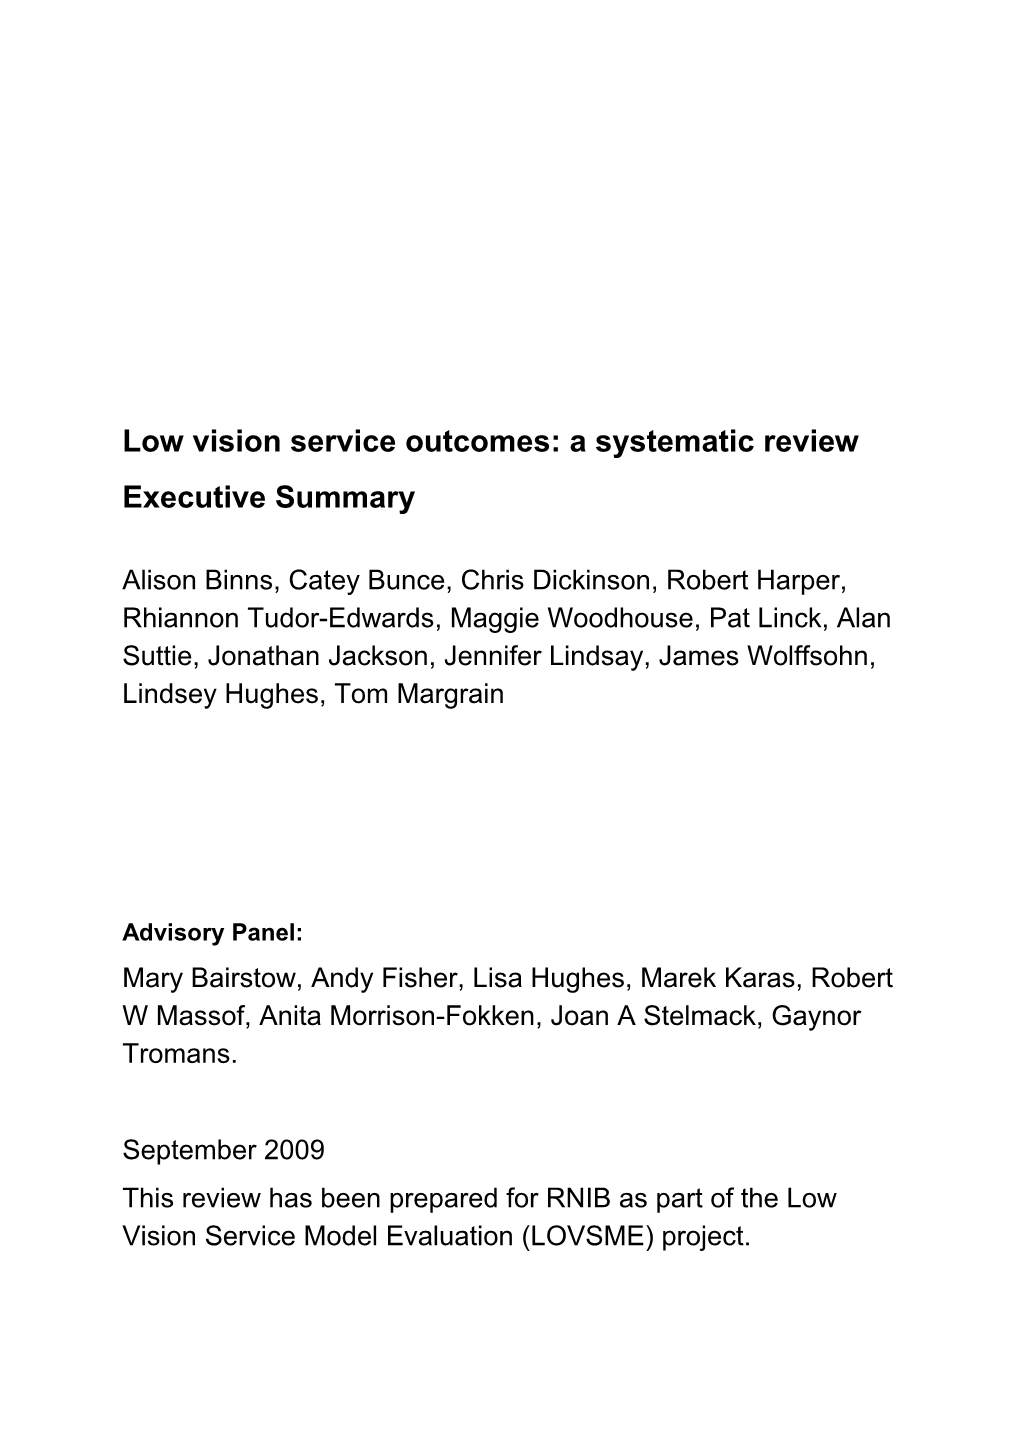 Low Vision Service Outcomes